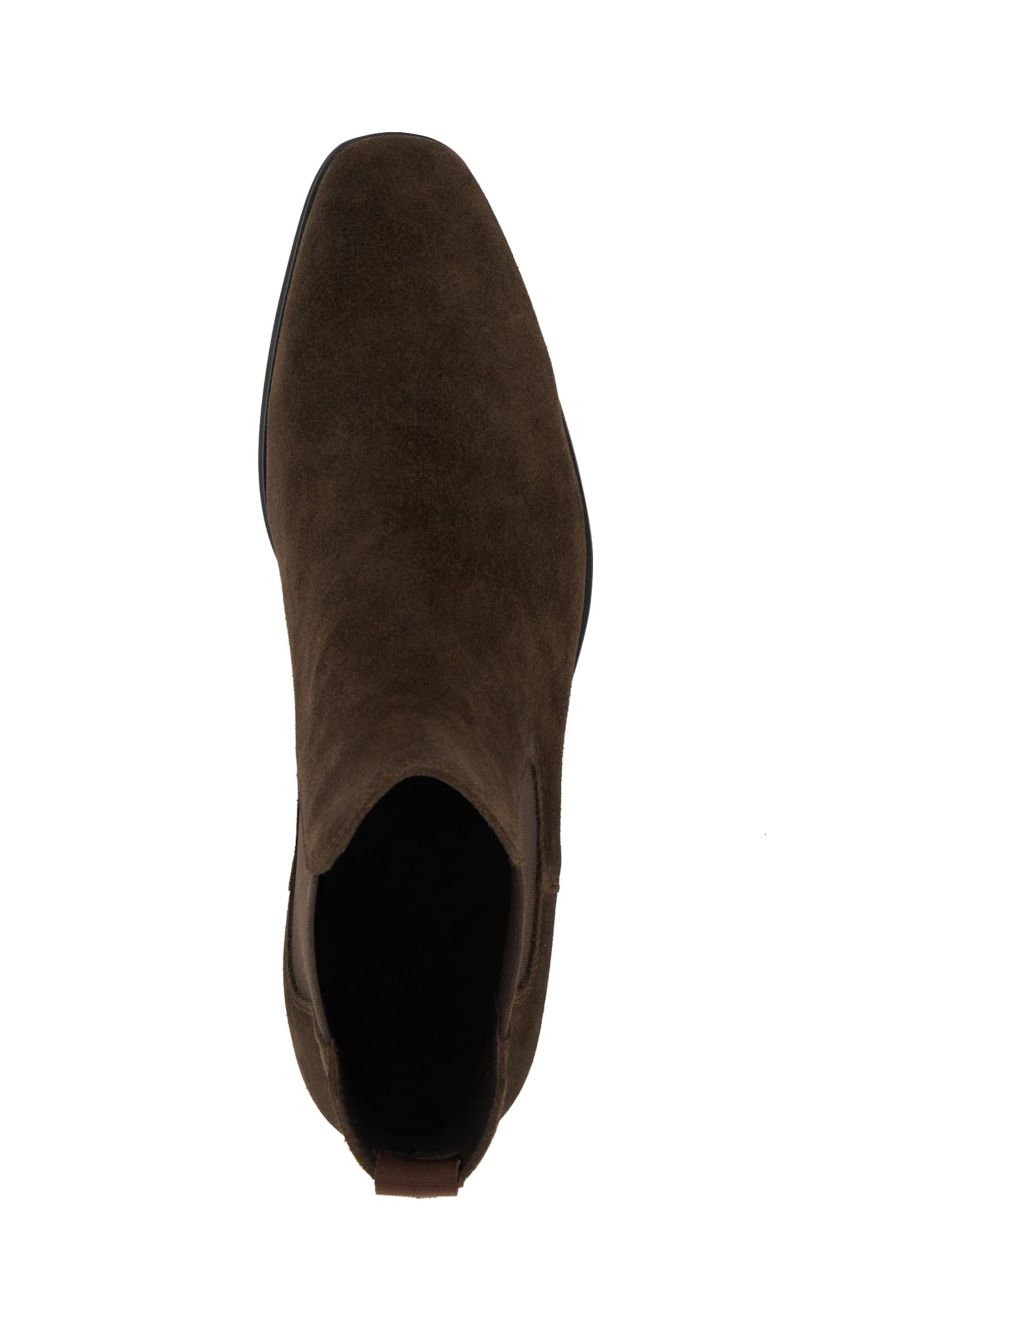 Leather Pull-On Chelsea Boots image 4